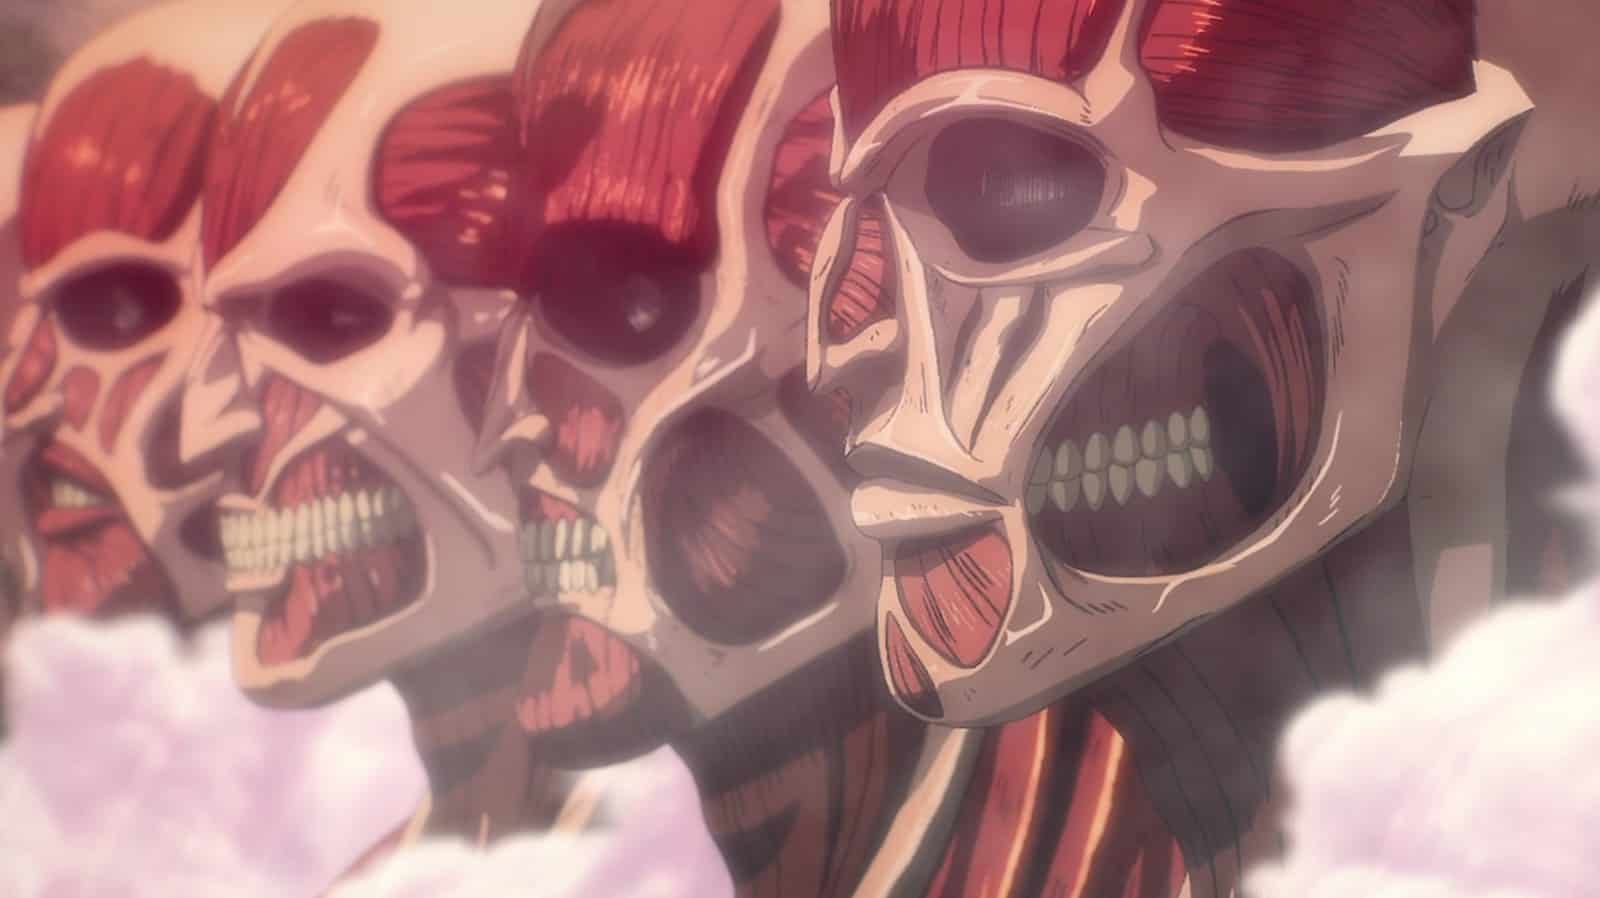 Attack on Titan finale review: Why the ending remains true to the story